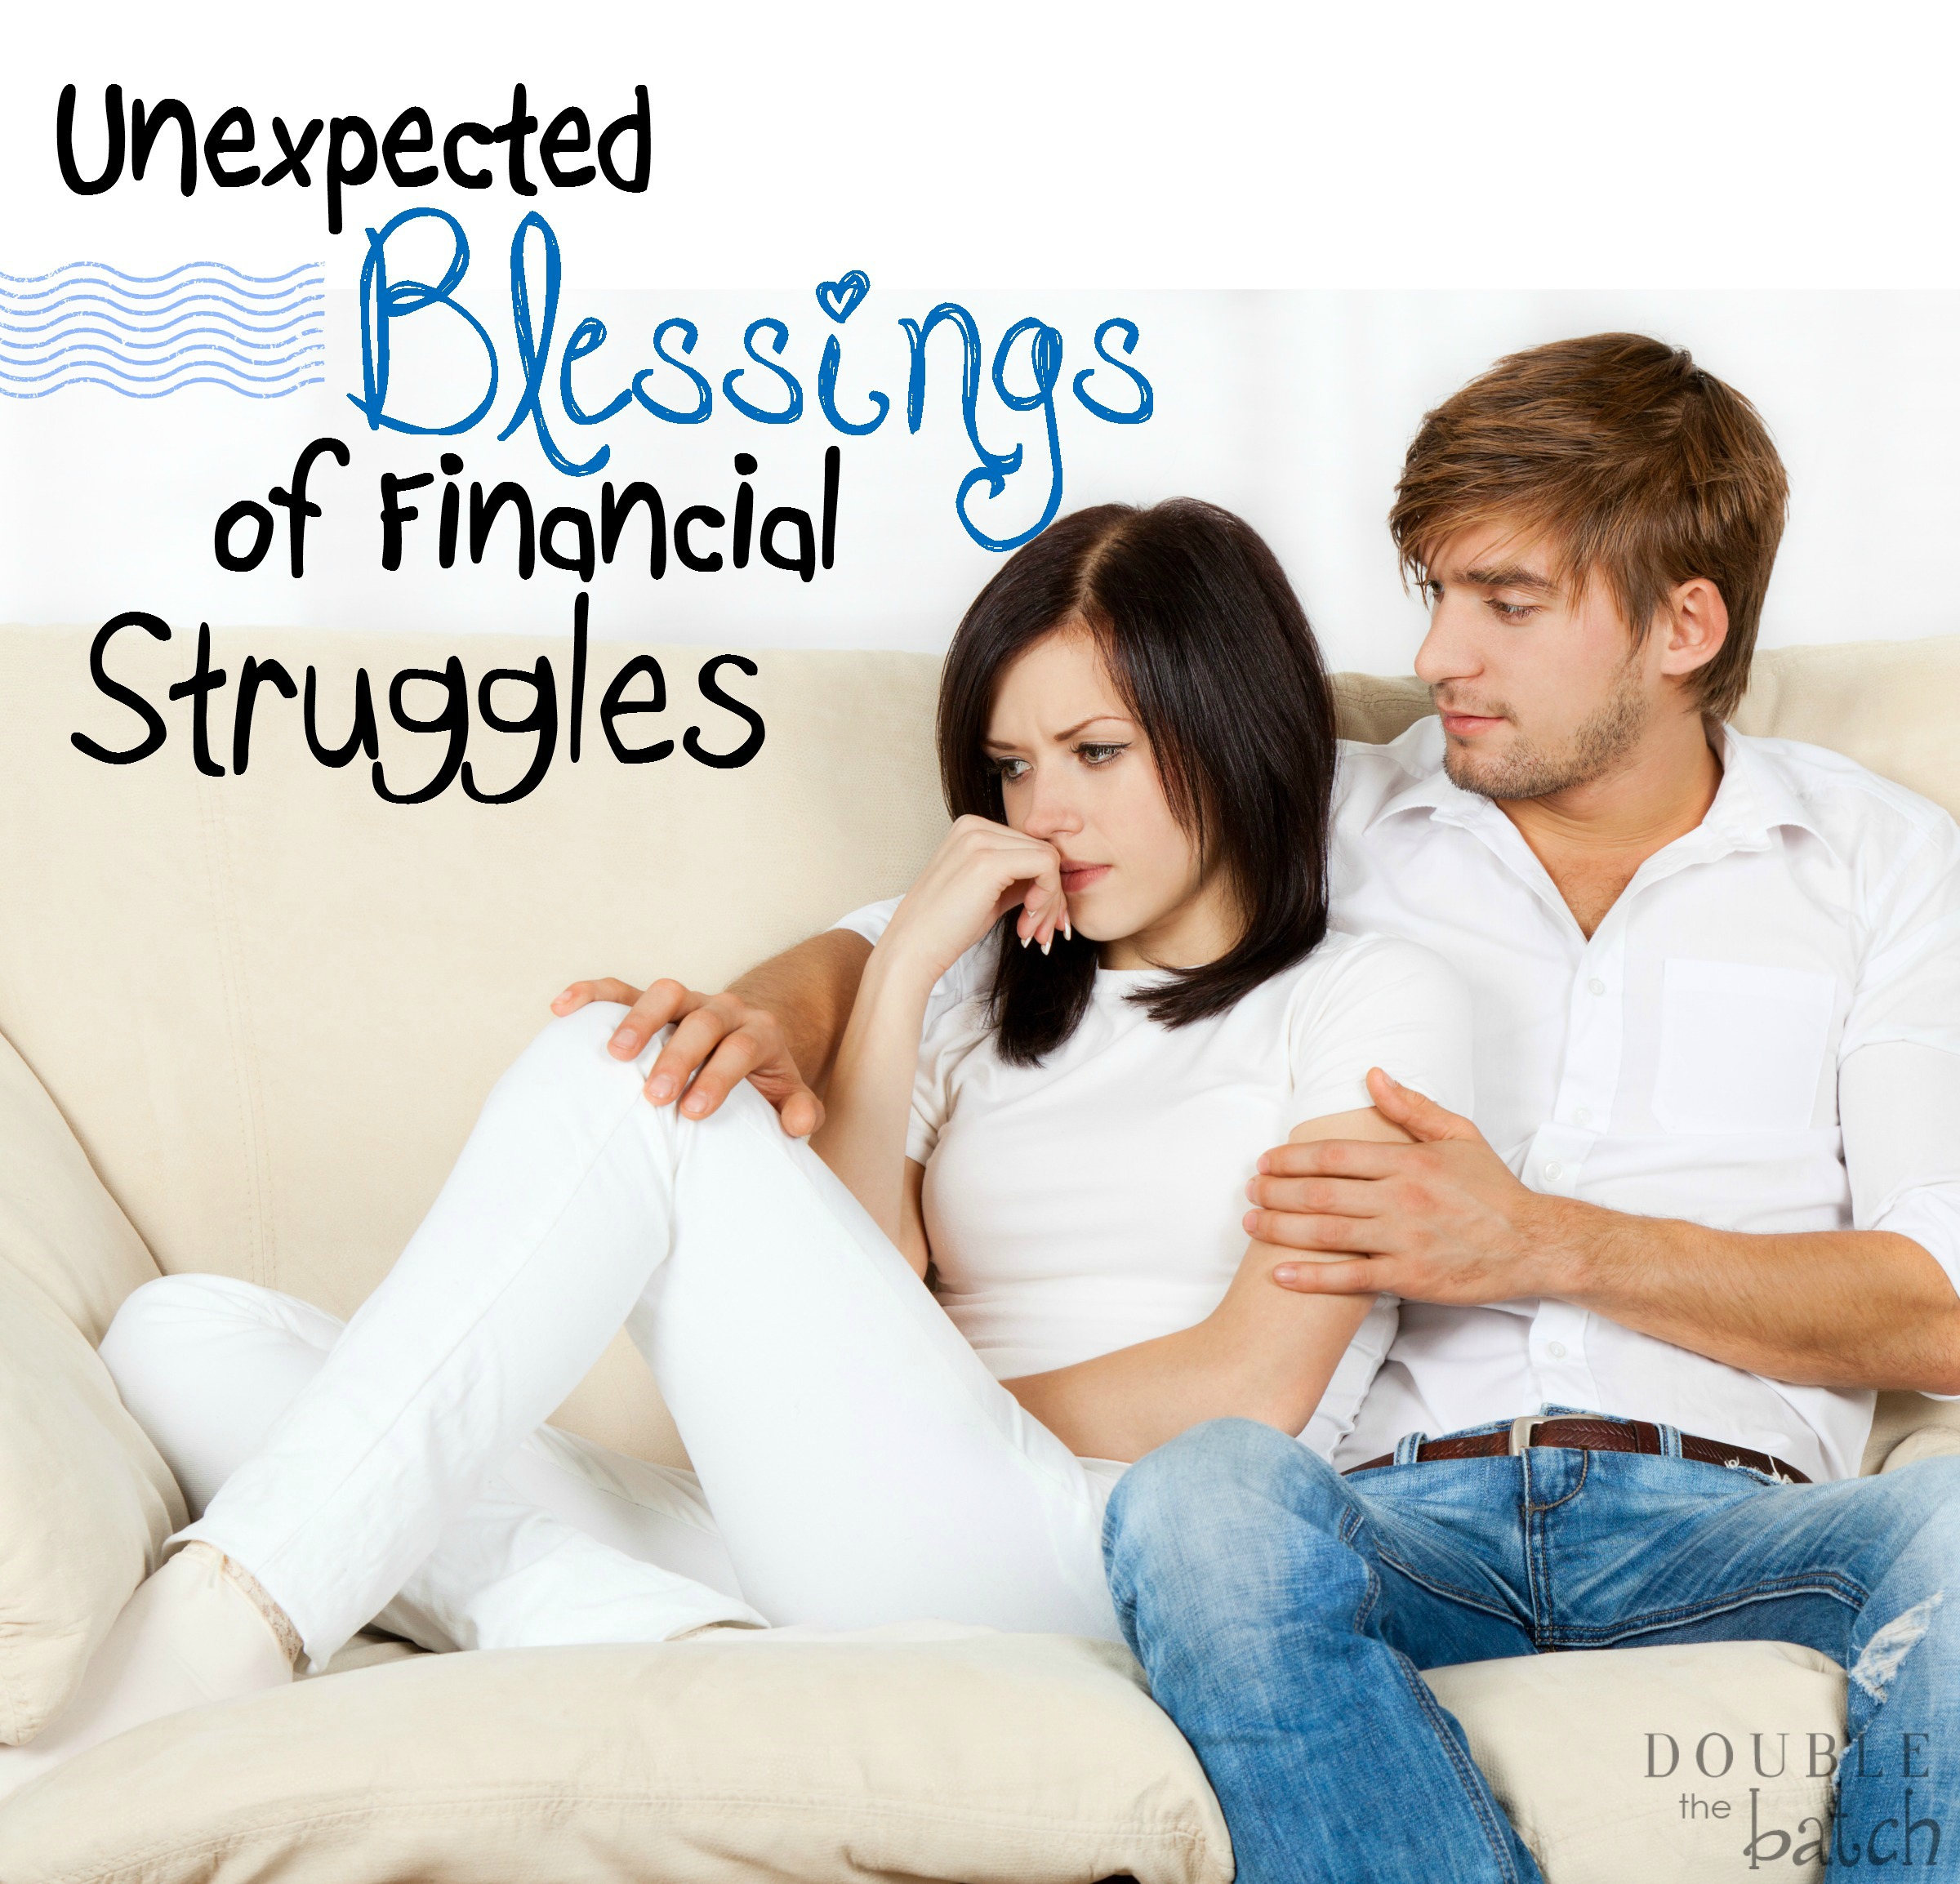 A great perspective on the blessings that come through financial struggles!